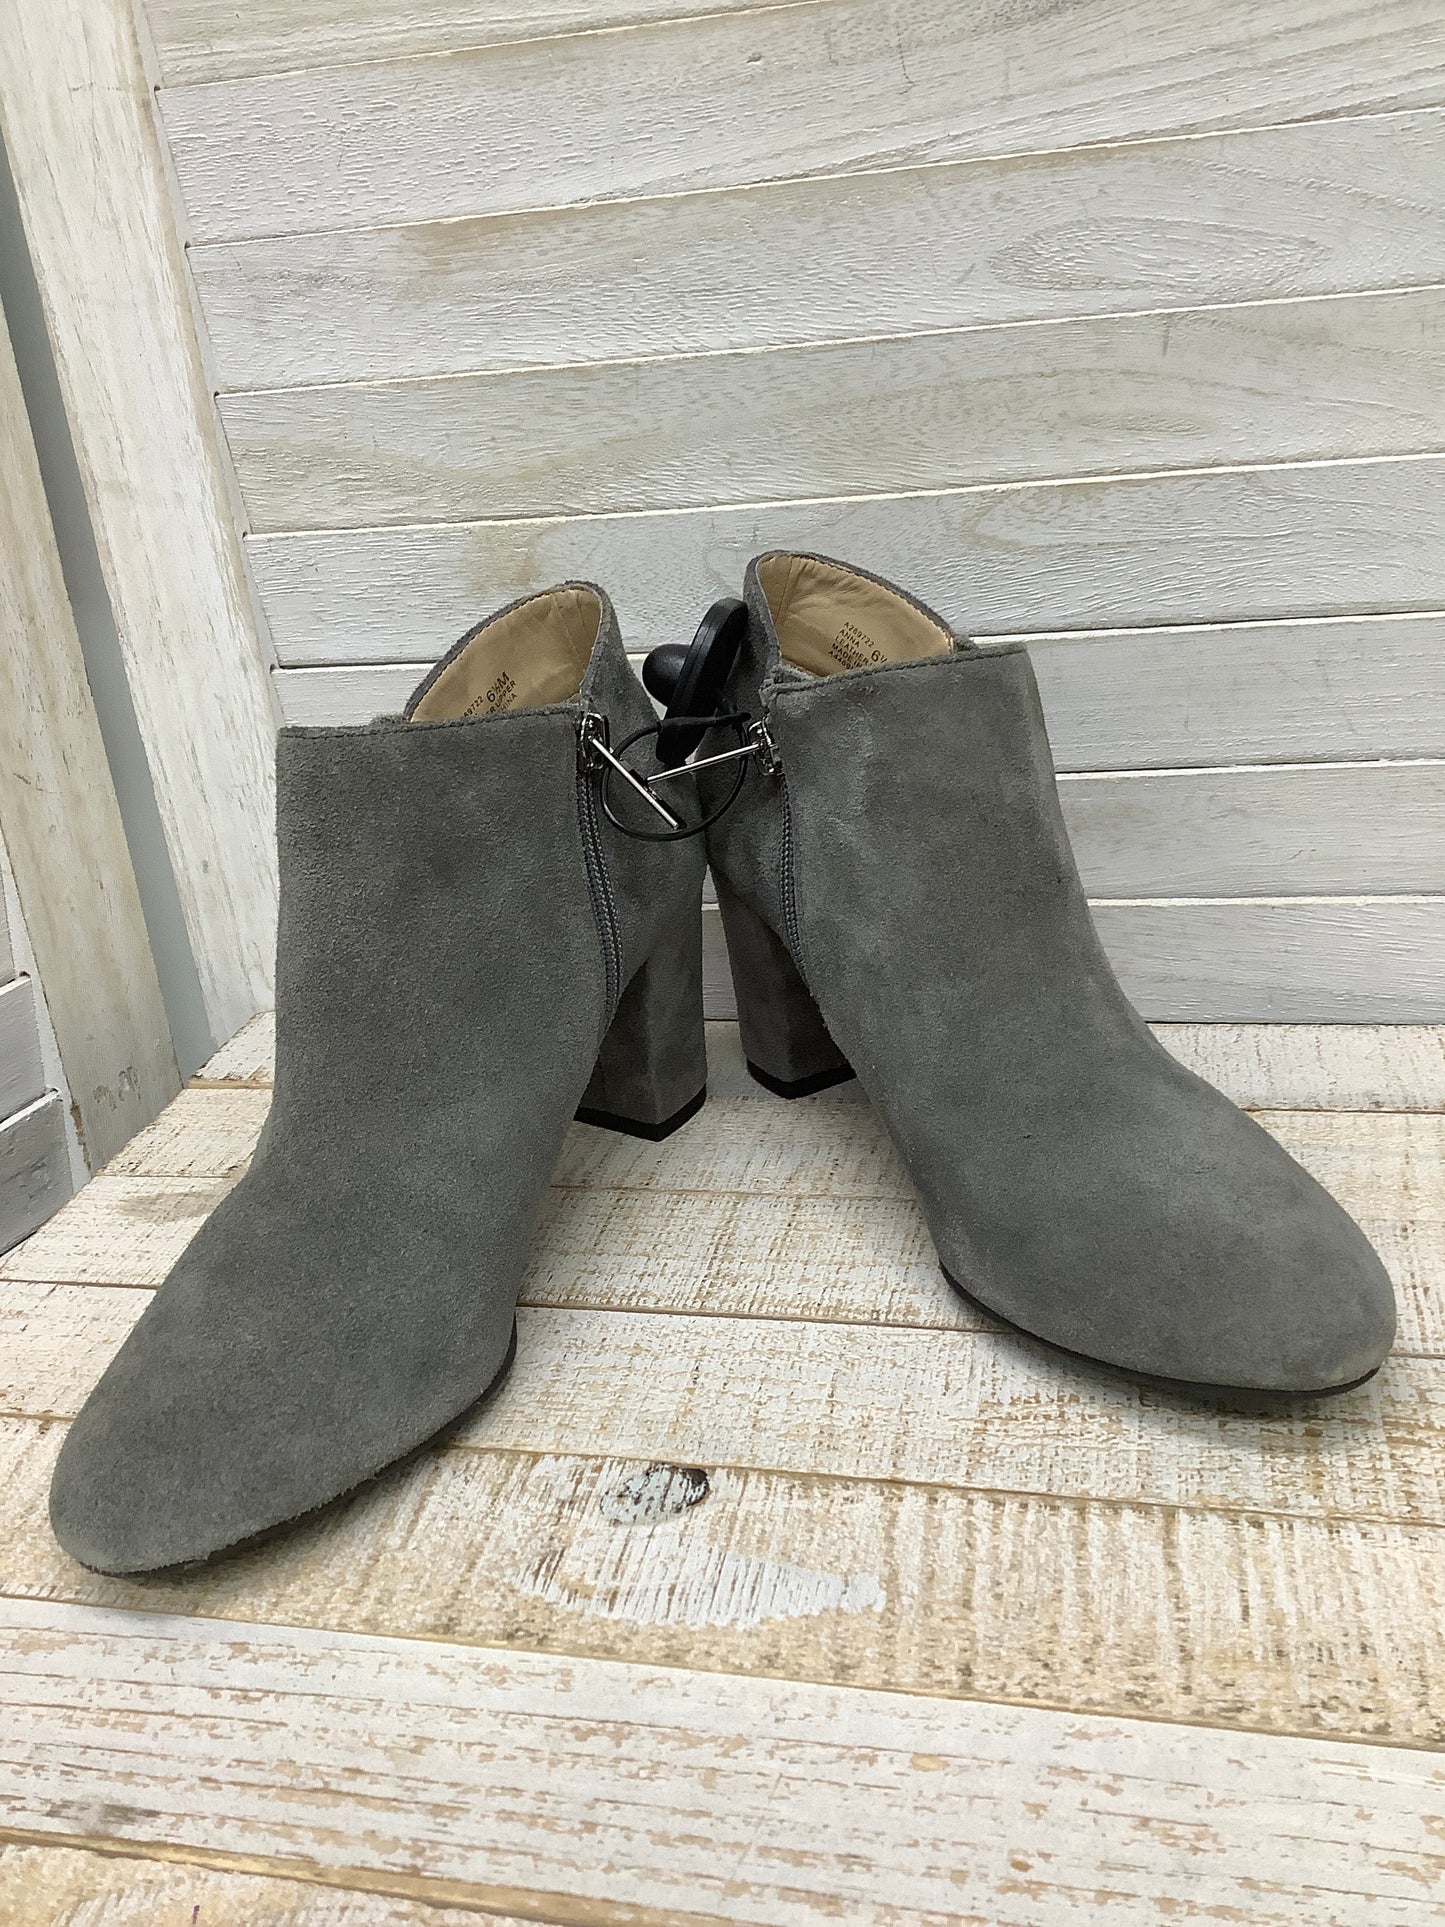 Grey Boots Ankle Heels Halston, Size 6.5